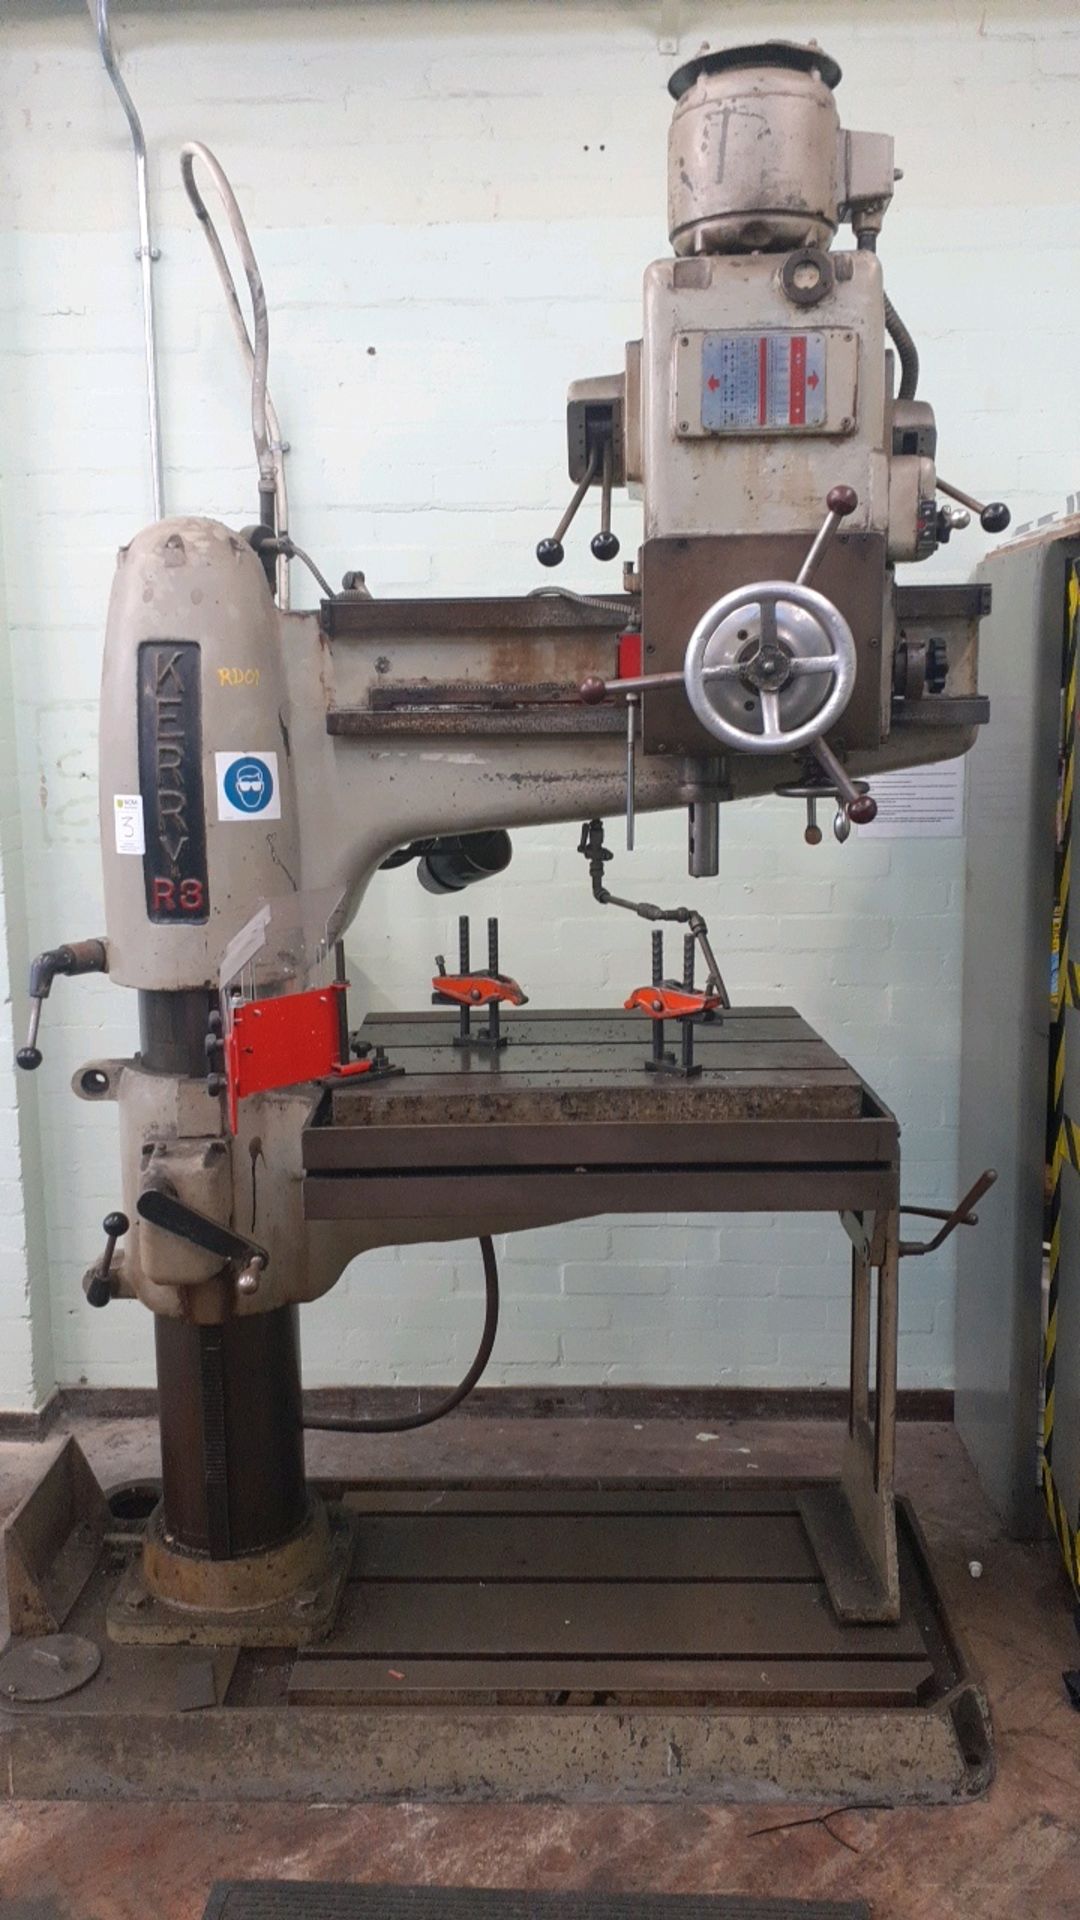 Kerry R3 radial arm drill